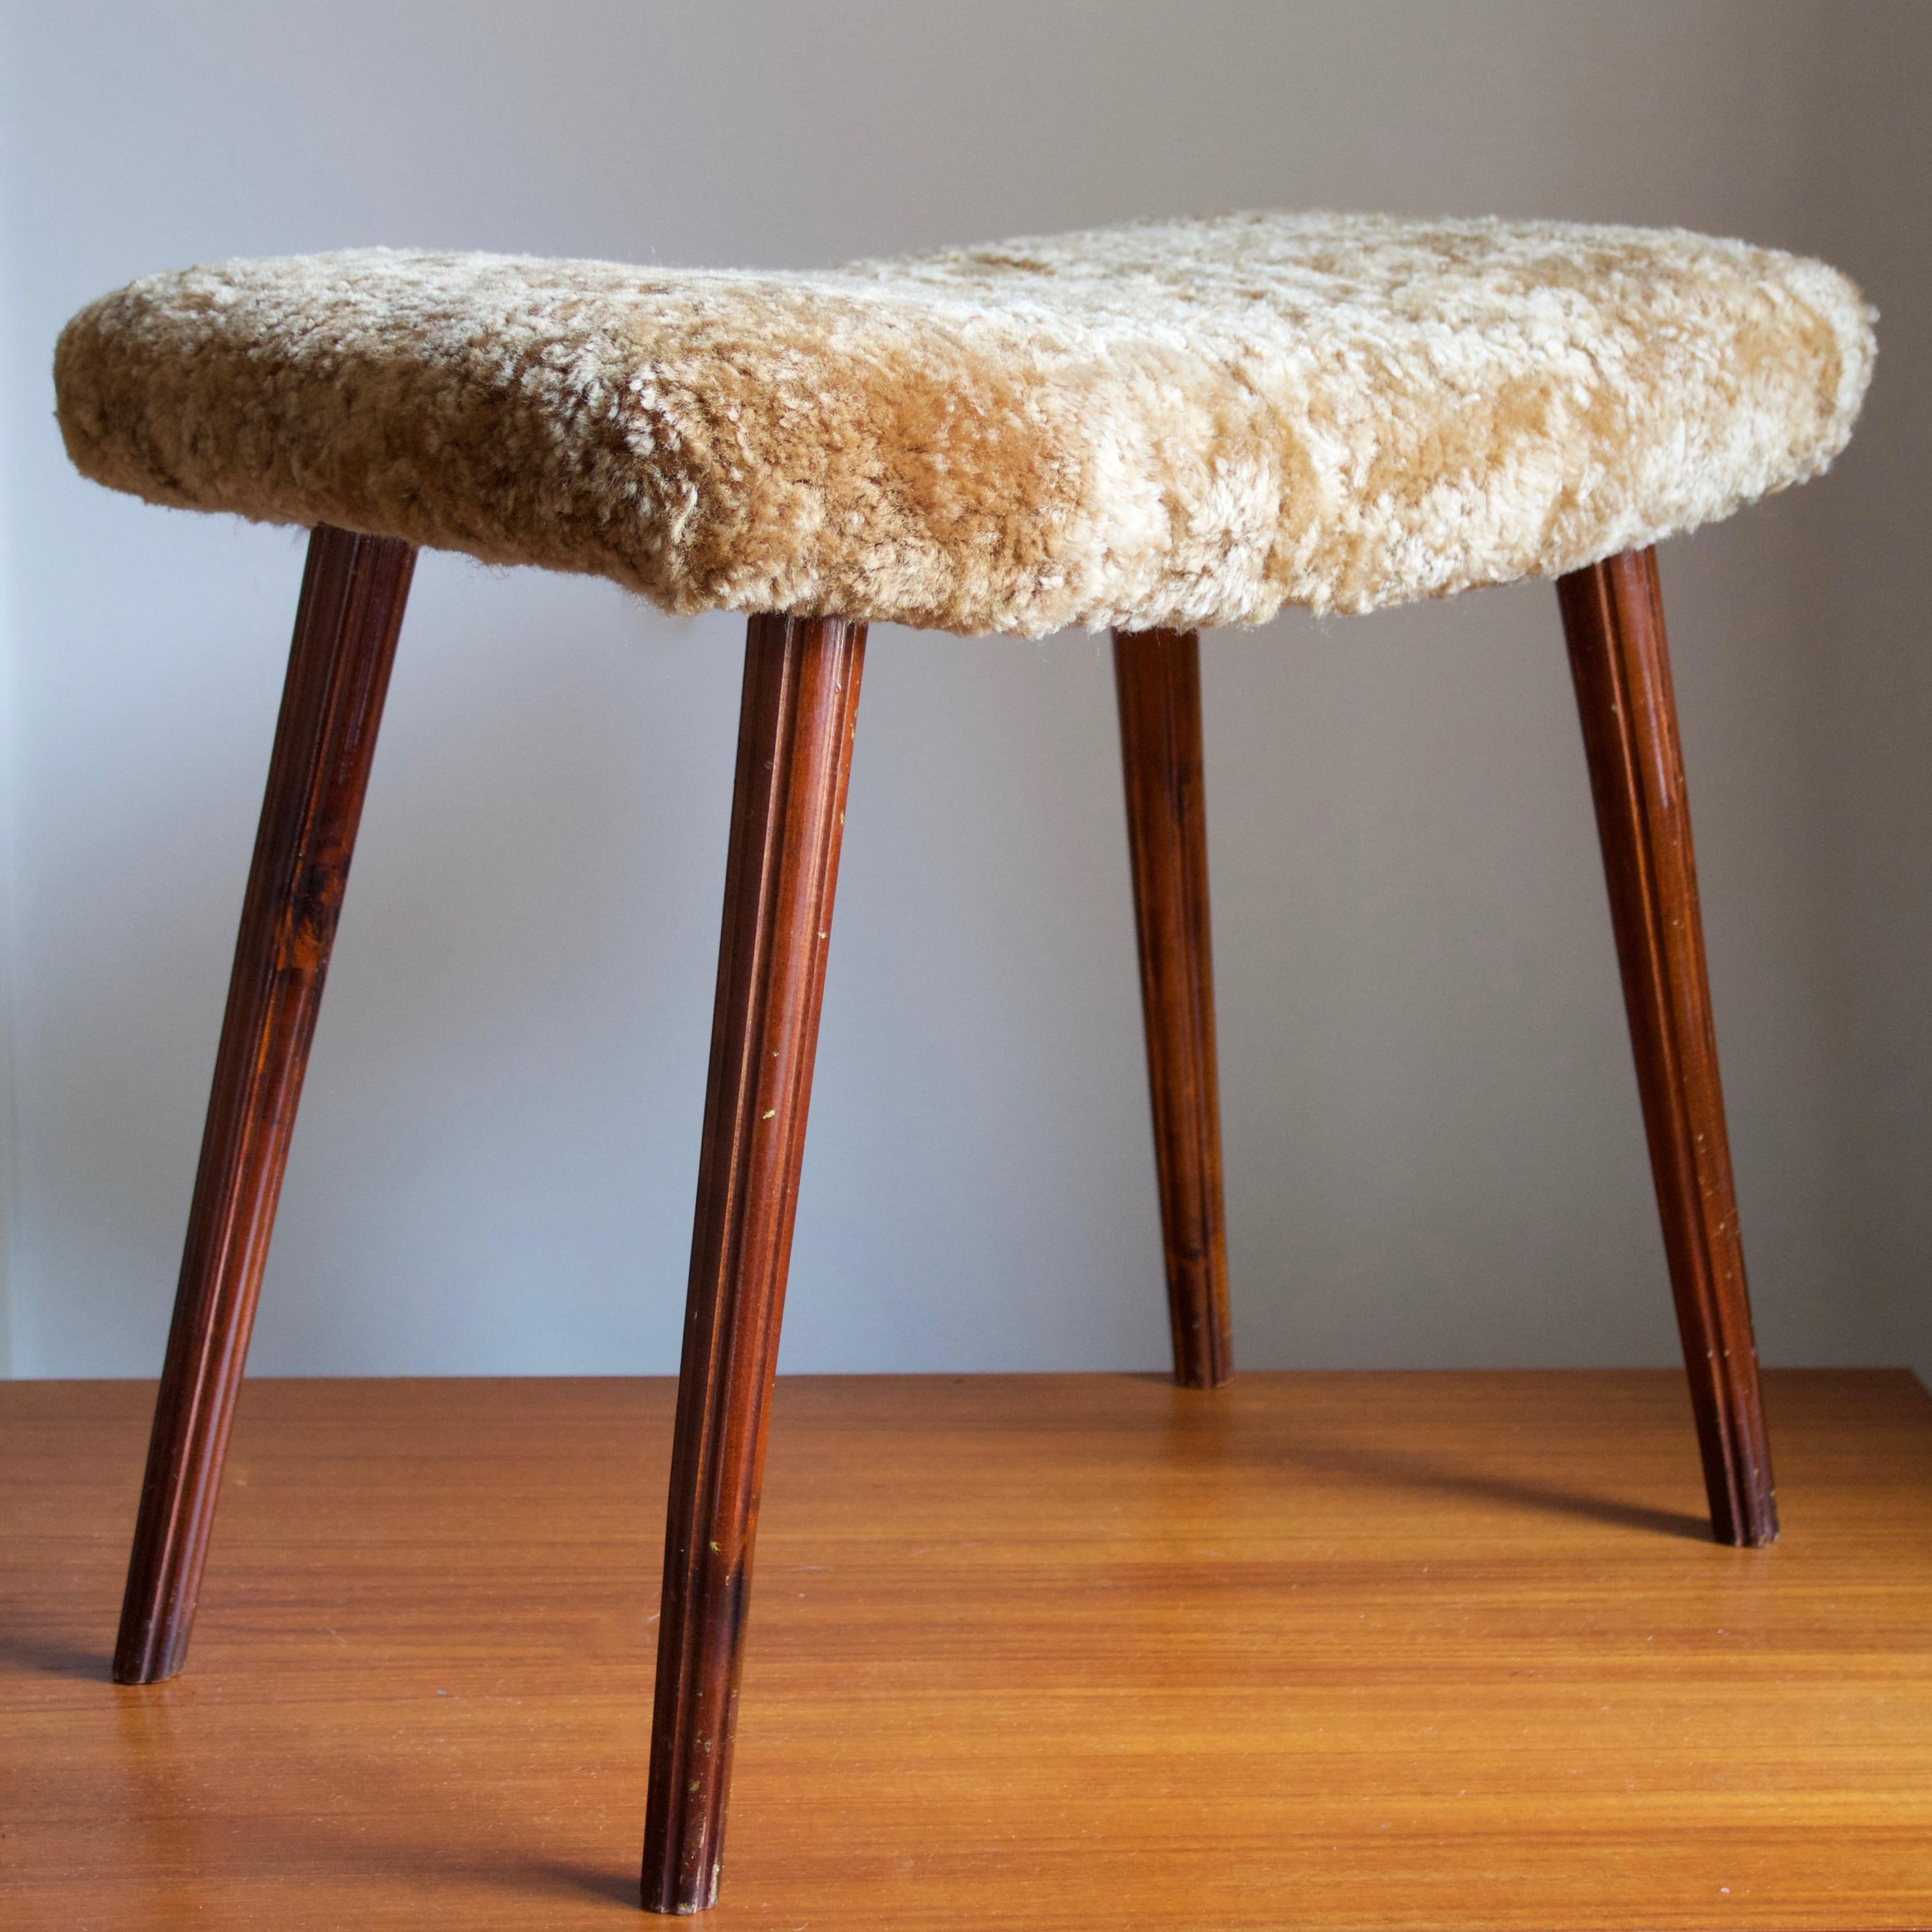 A stool in dark stained wood with simple carved ornamentation, overstuffed seat reupholstered in brand new sheepskin upholstery. Produced in Sweden, 1950s.

Other designers of the period include Finn Juhl, Hans Wegner, Isamu Noguchi, Charlotte